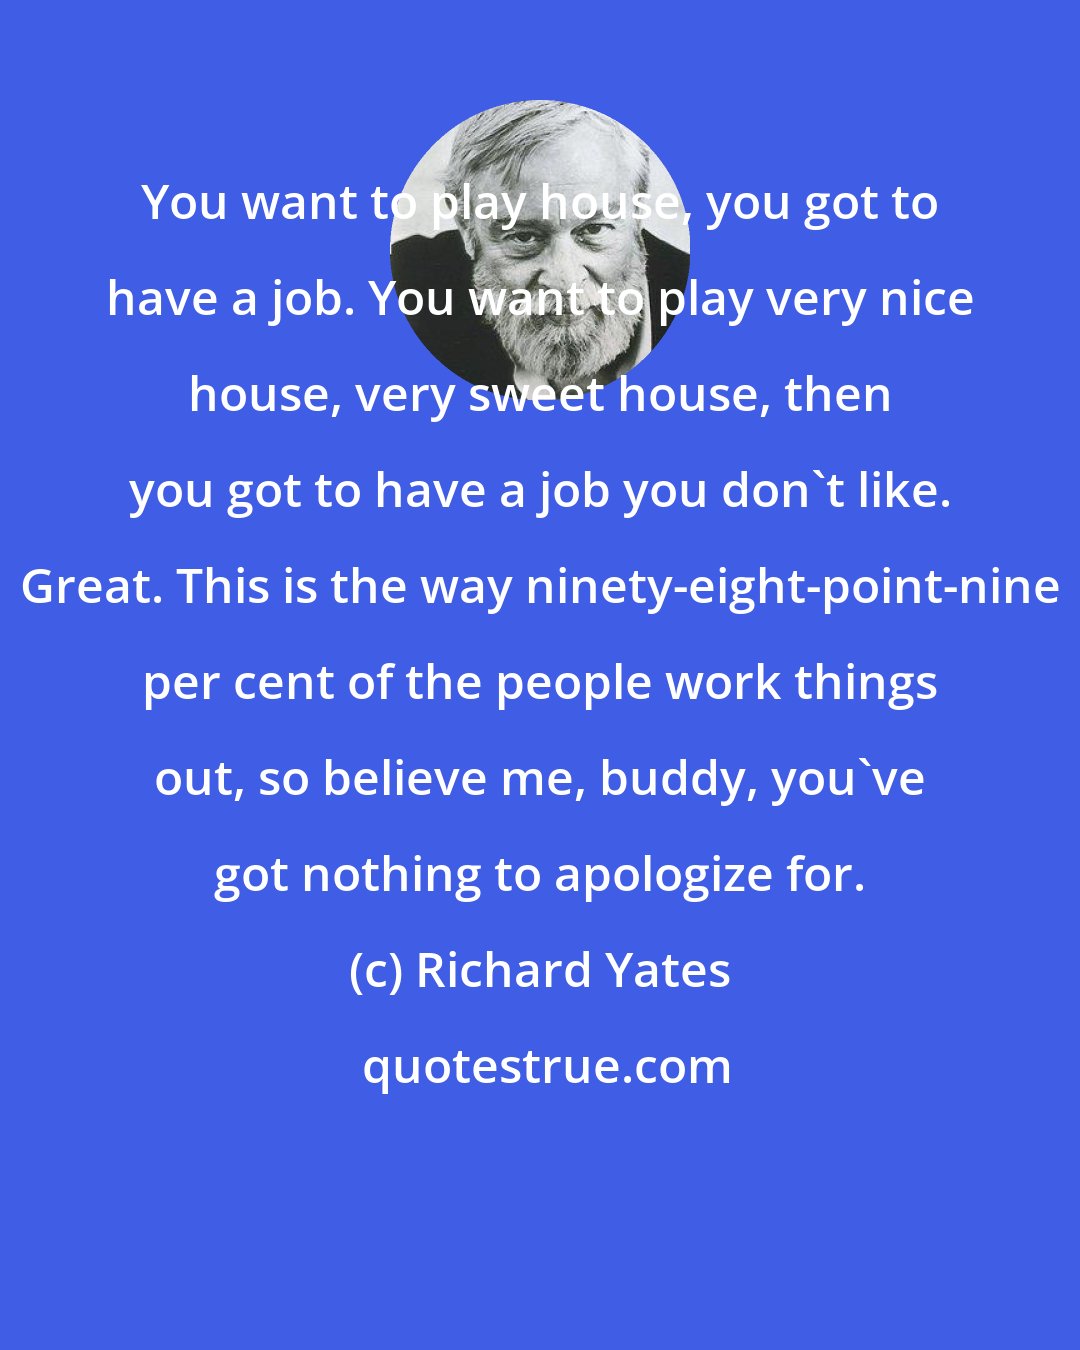 Richard Yates: You want to play house, you got to have a job. You want to play very nice house, very sweet house, then you got to have a job you don't like. Great. This is the way ninety-eight-point-nine per cent of the people work things out, so believe me, buddy, you've got nothing to apologize for.